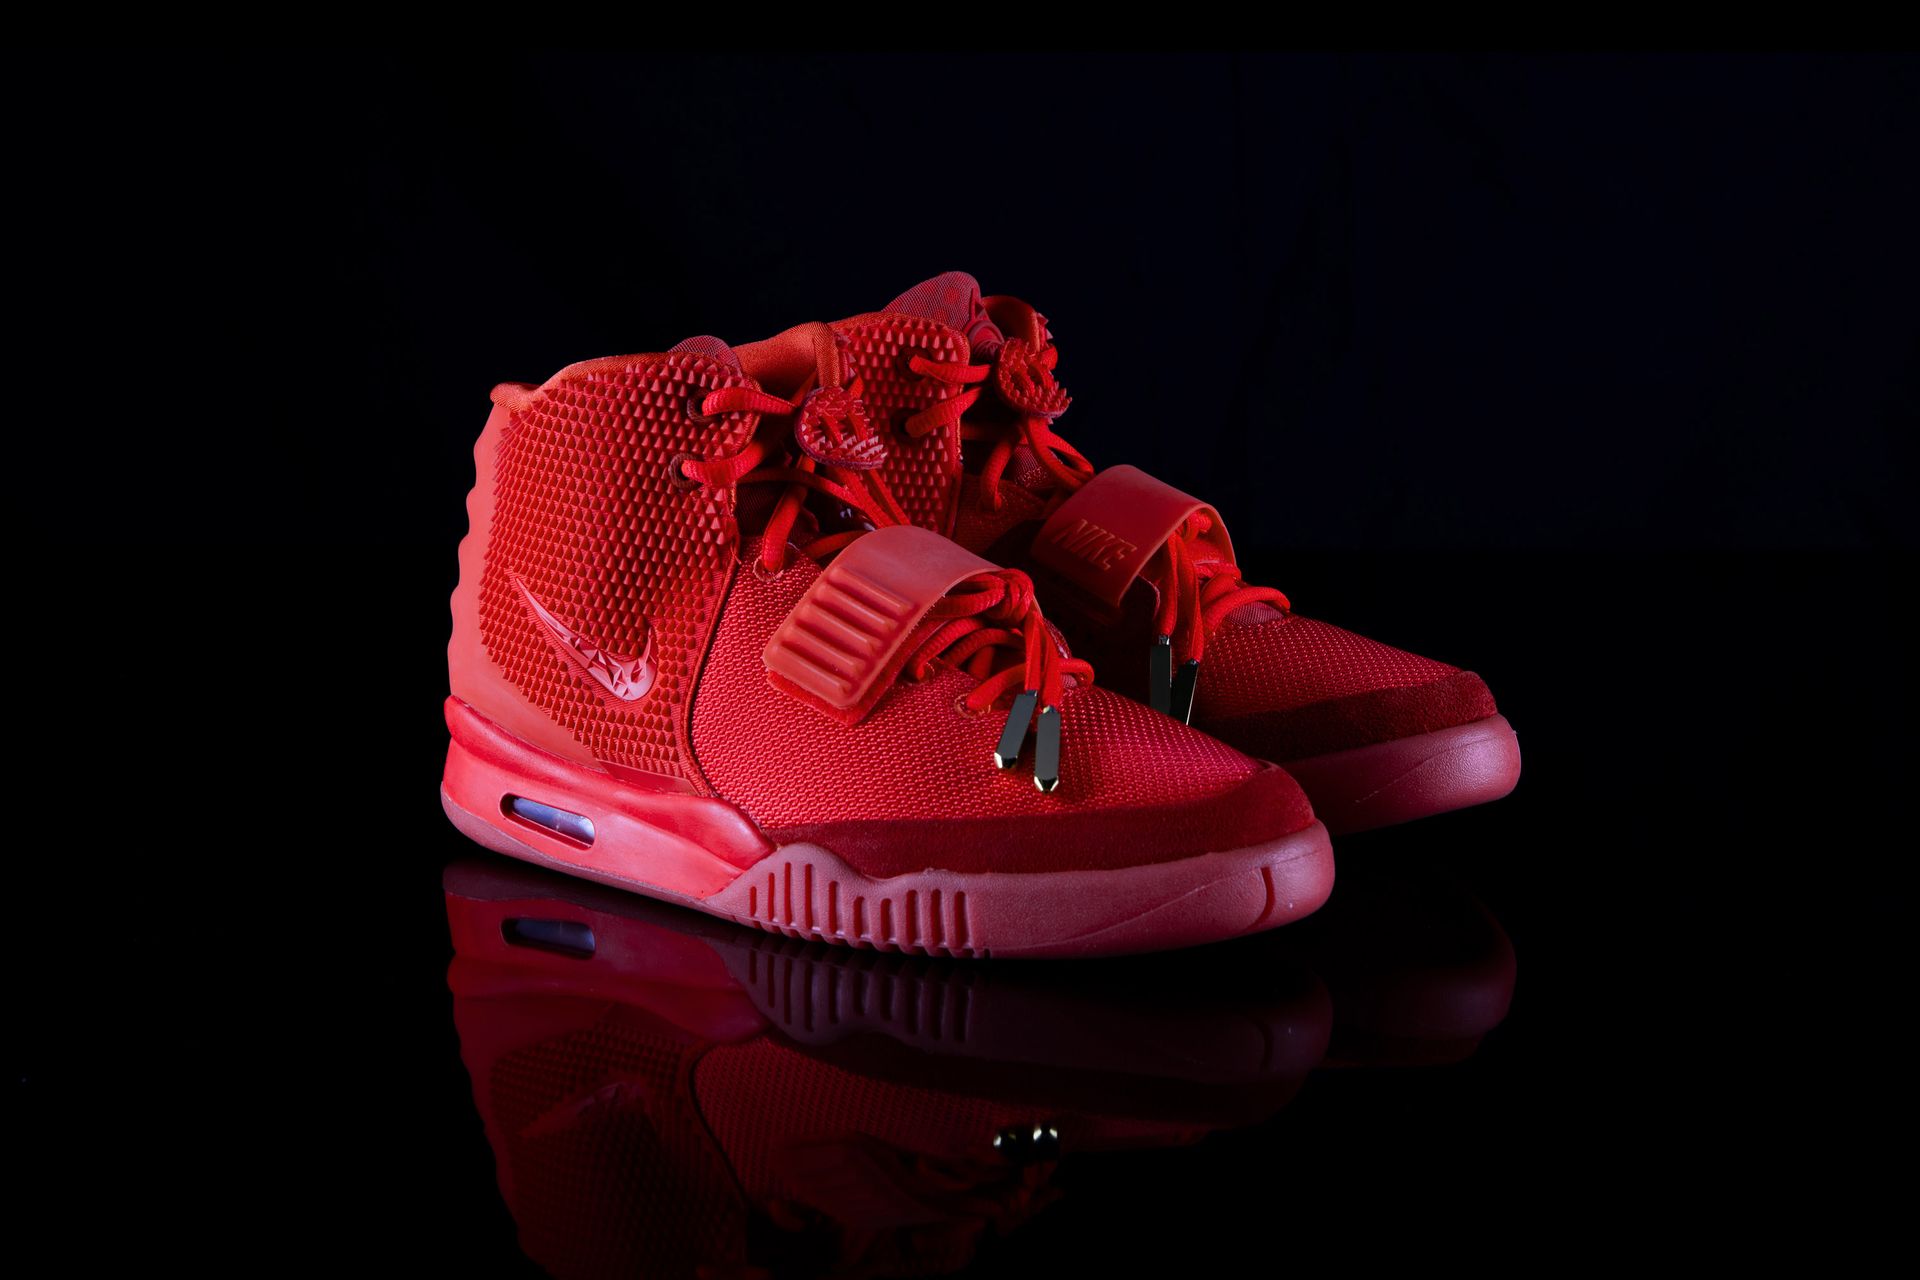 NIKE Air Yeezy 2 "Red October" | Size US 9 EUR 42.5, 2014

This is the latest co&hellip;